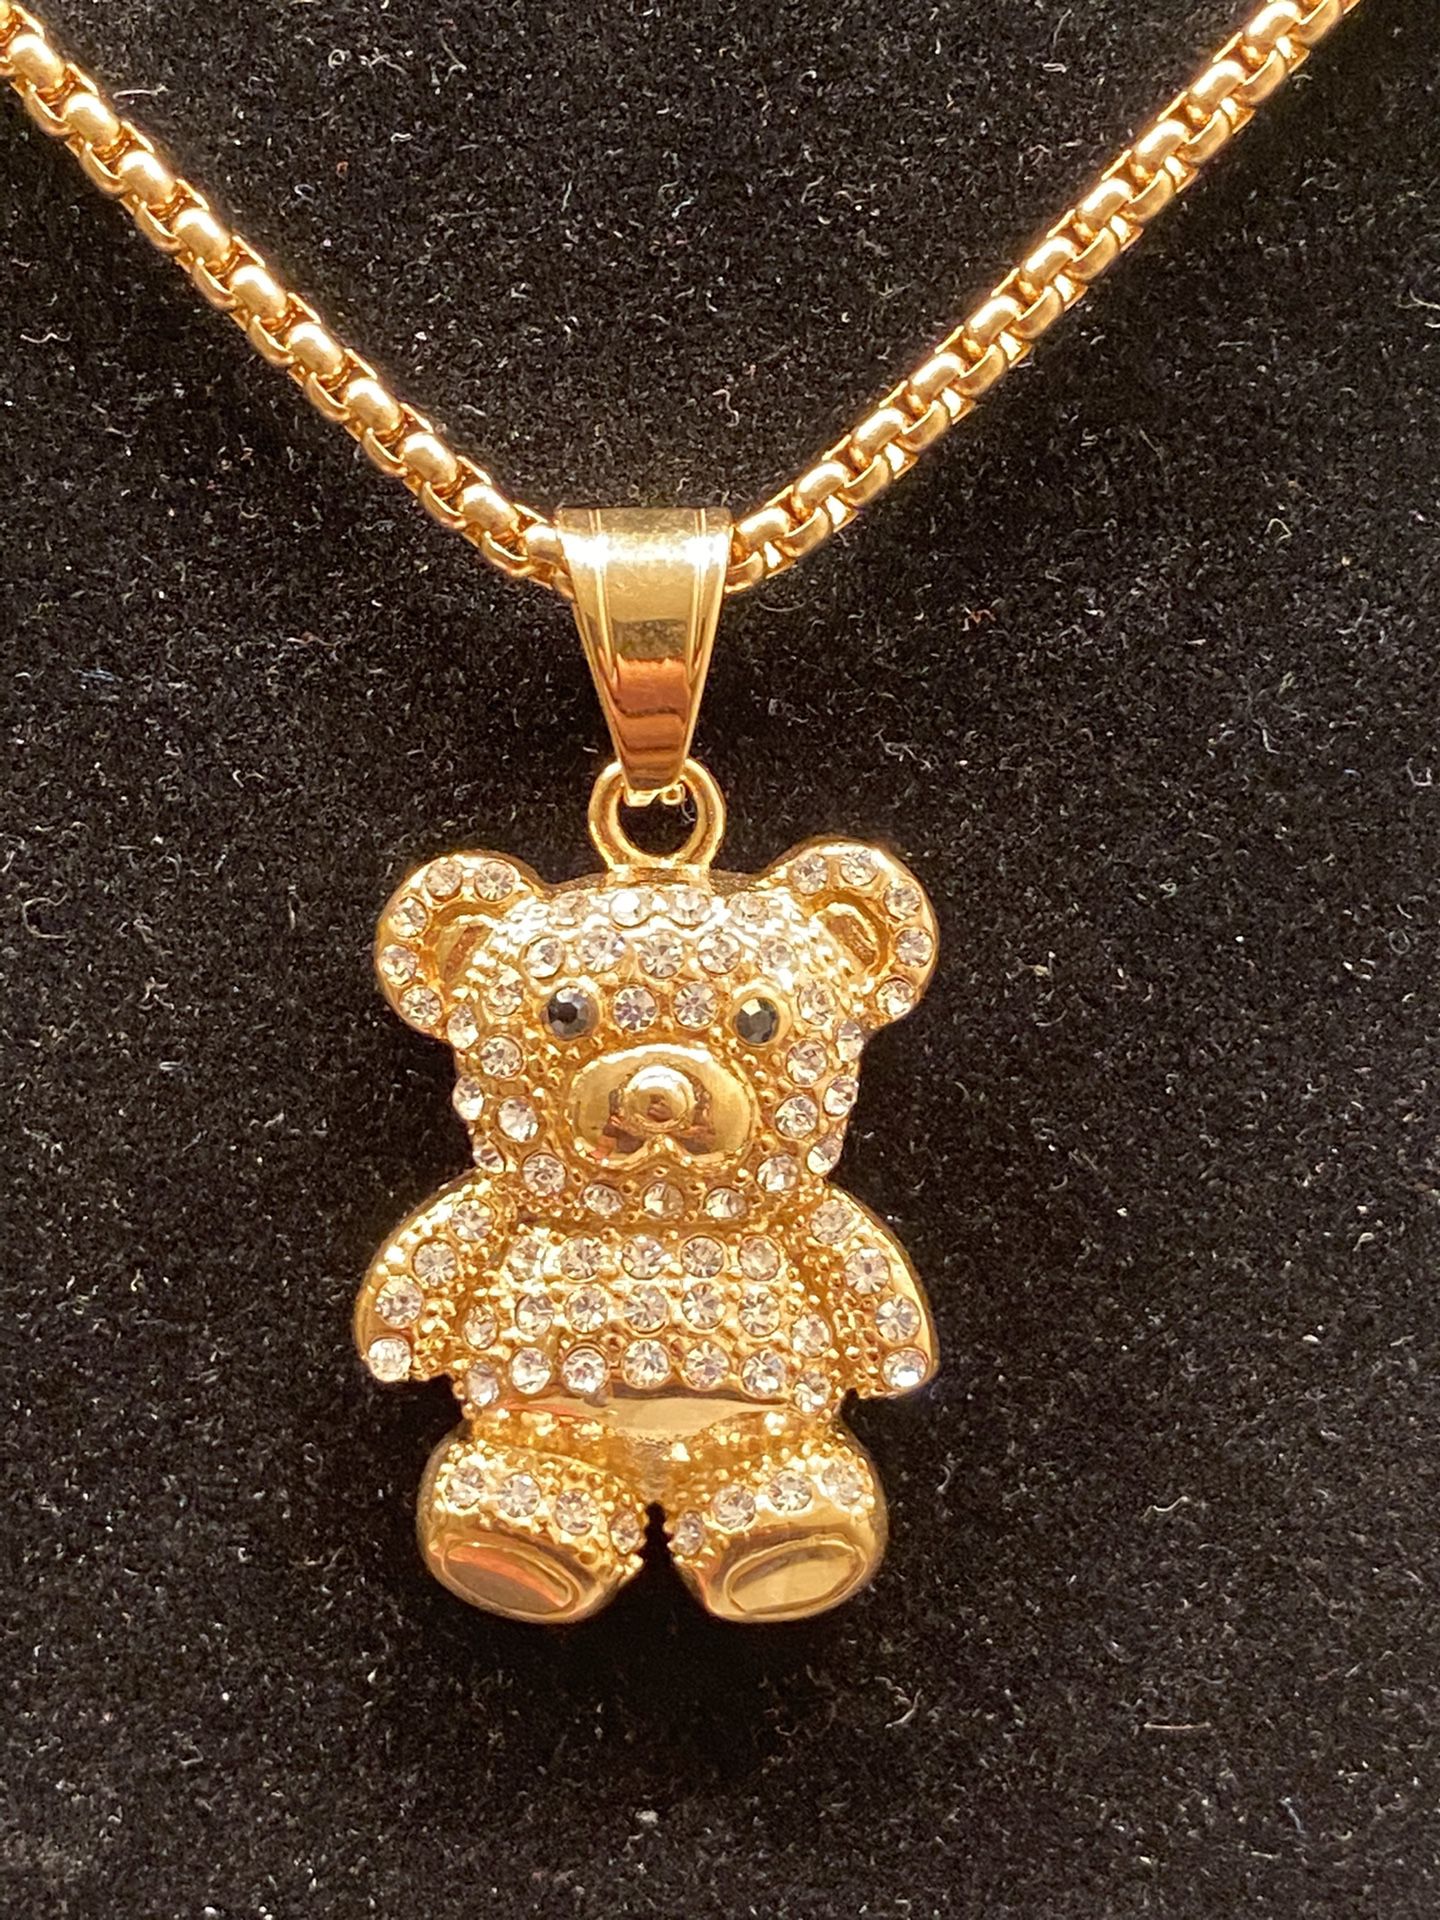 Gold stainless steel bear pendant with chain